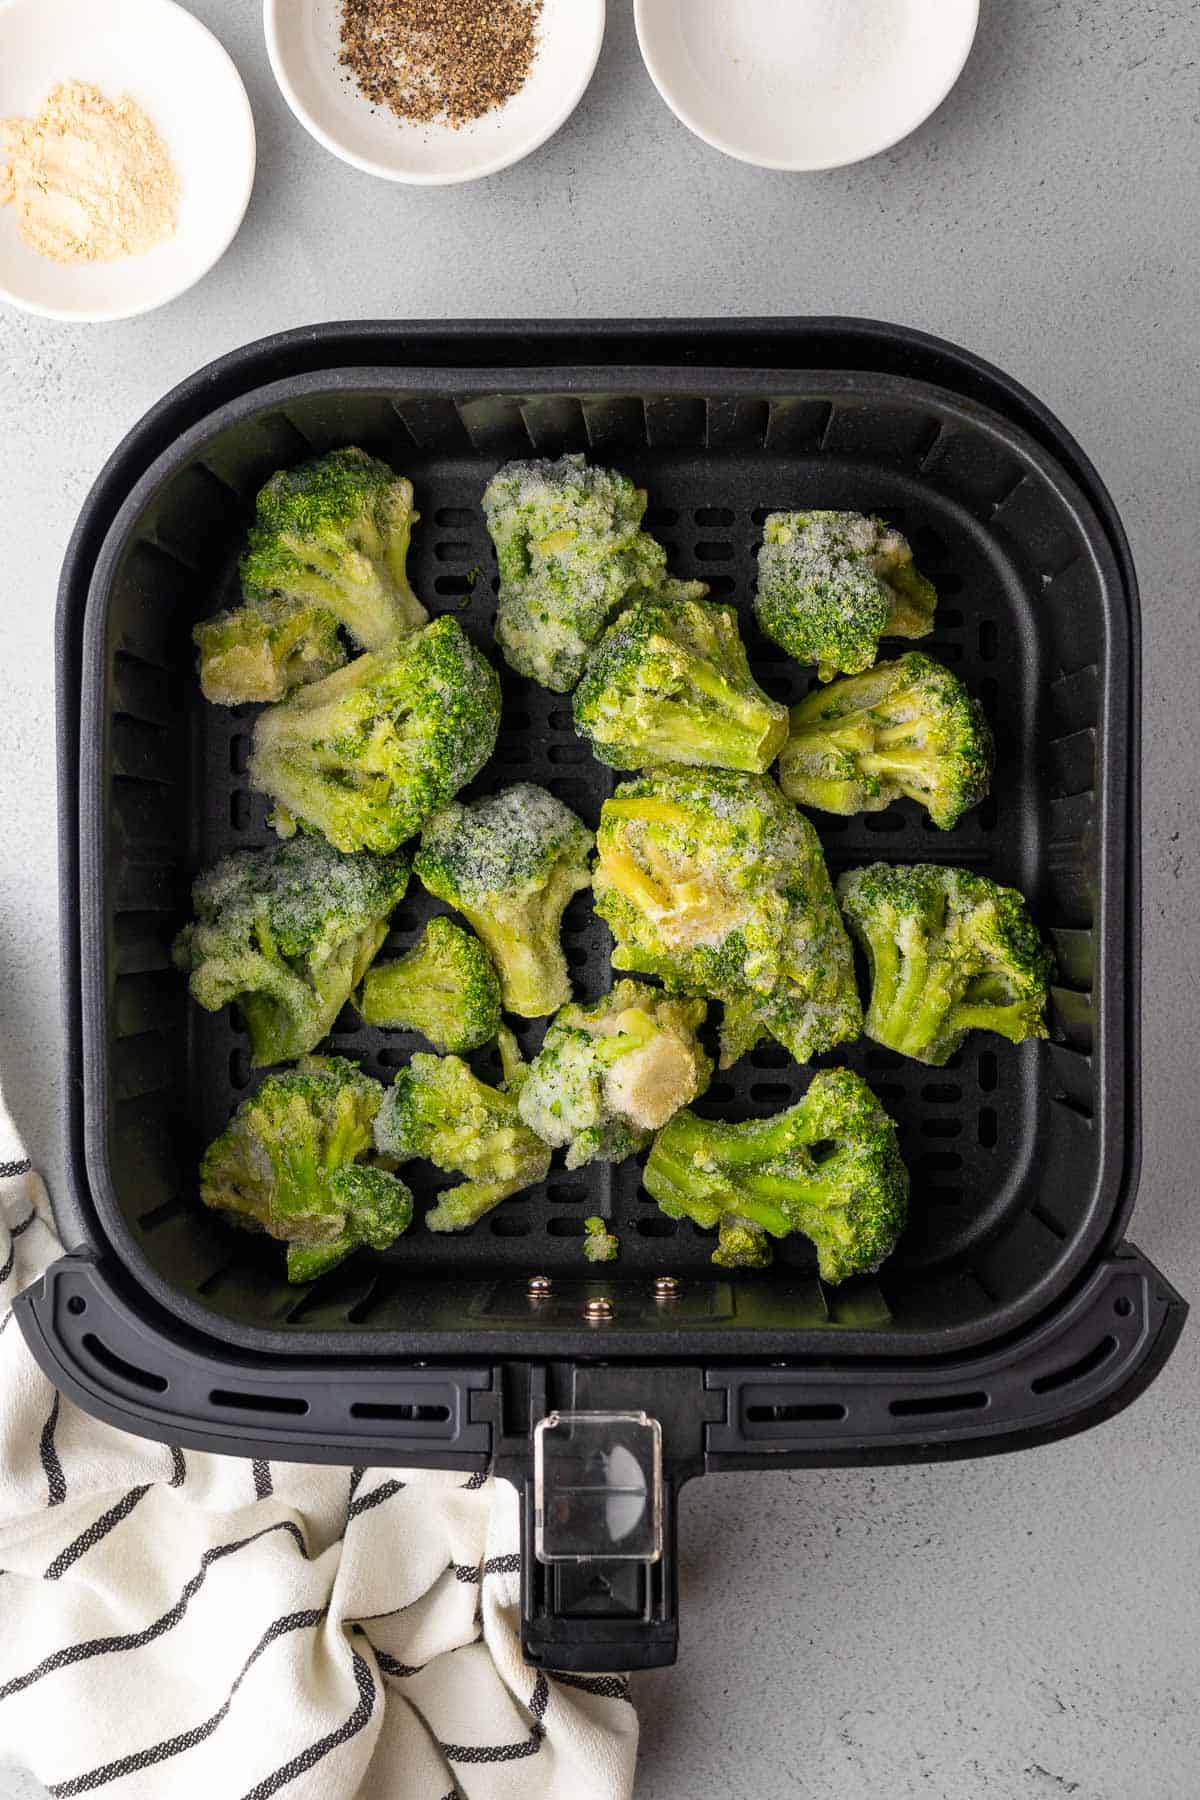 broccoli in the air fryer basket surrounded by the seasonings in little white dishes